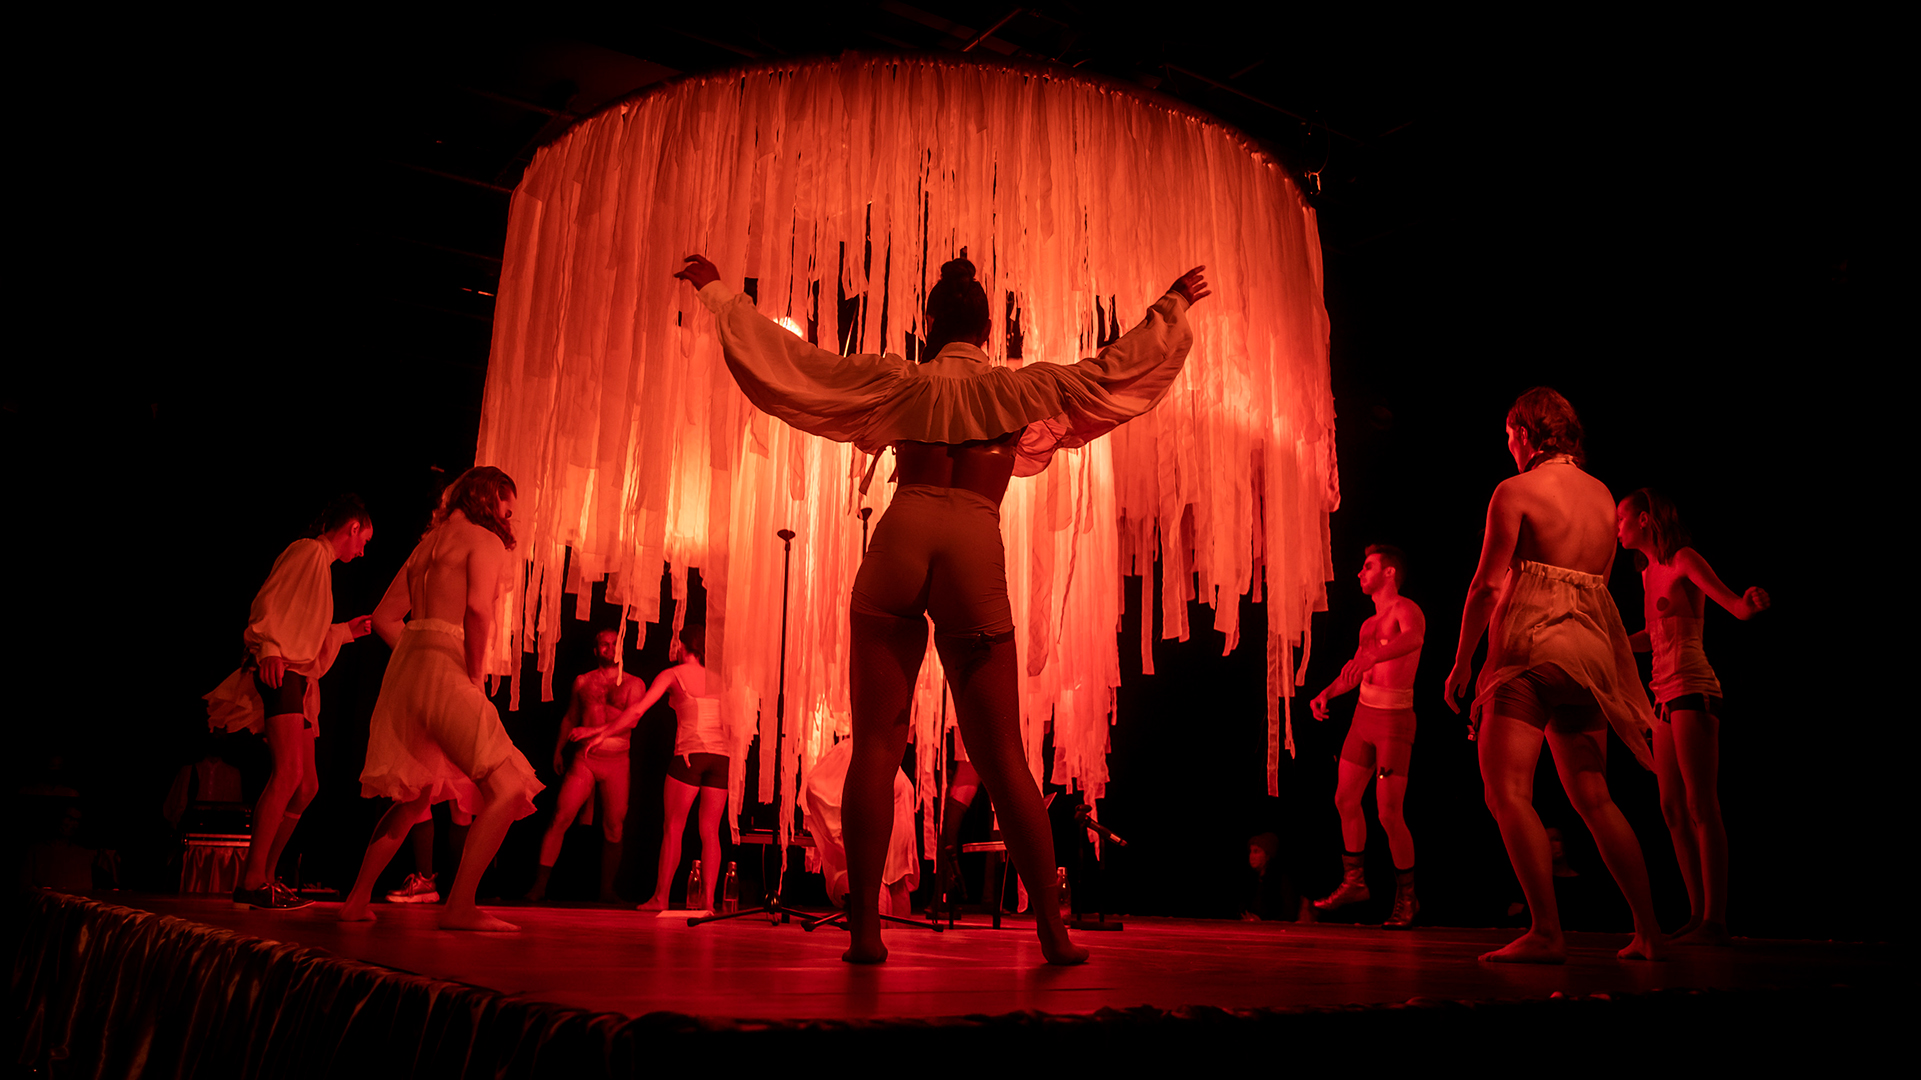 Performers on stage with backs facing the camera. Dark background and reddish lighting, large chandelier in the middle of the stage.